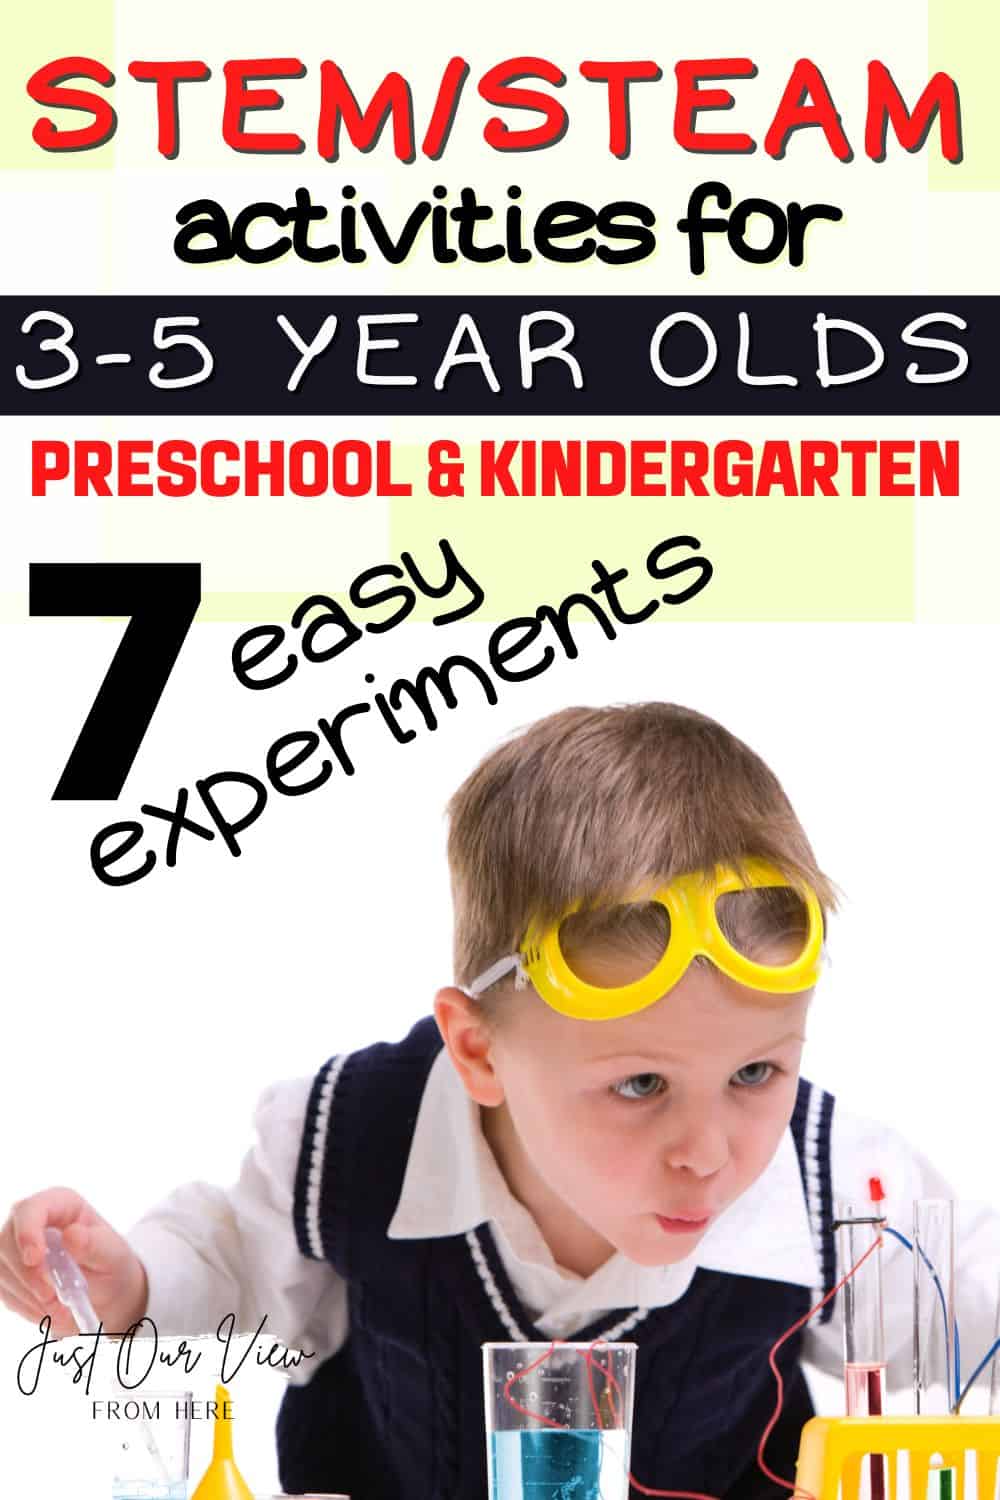 young boy doing a science experiment, text overlay STEM steam ACTIVITIES FOR 3-5 YEARSOLDS, preschool and kindergarten 7 easy experiments